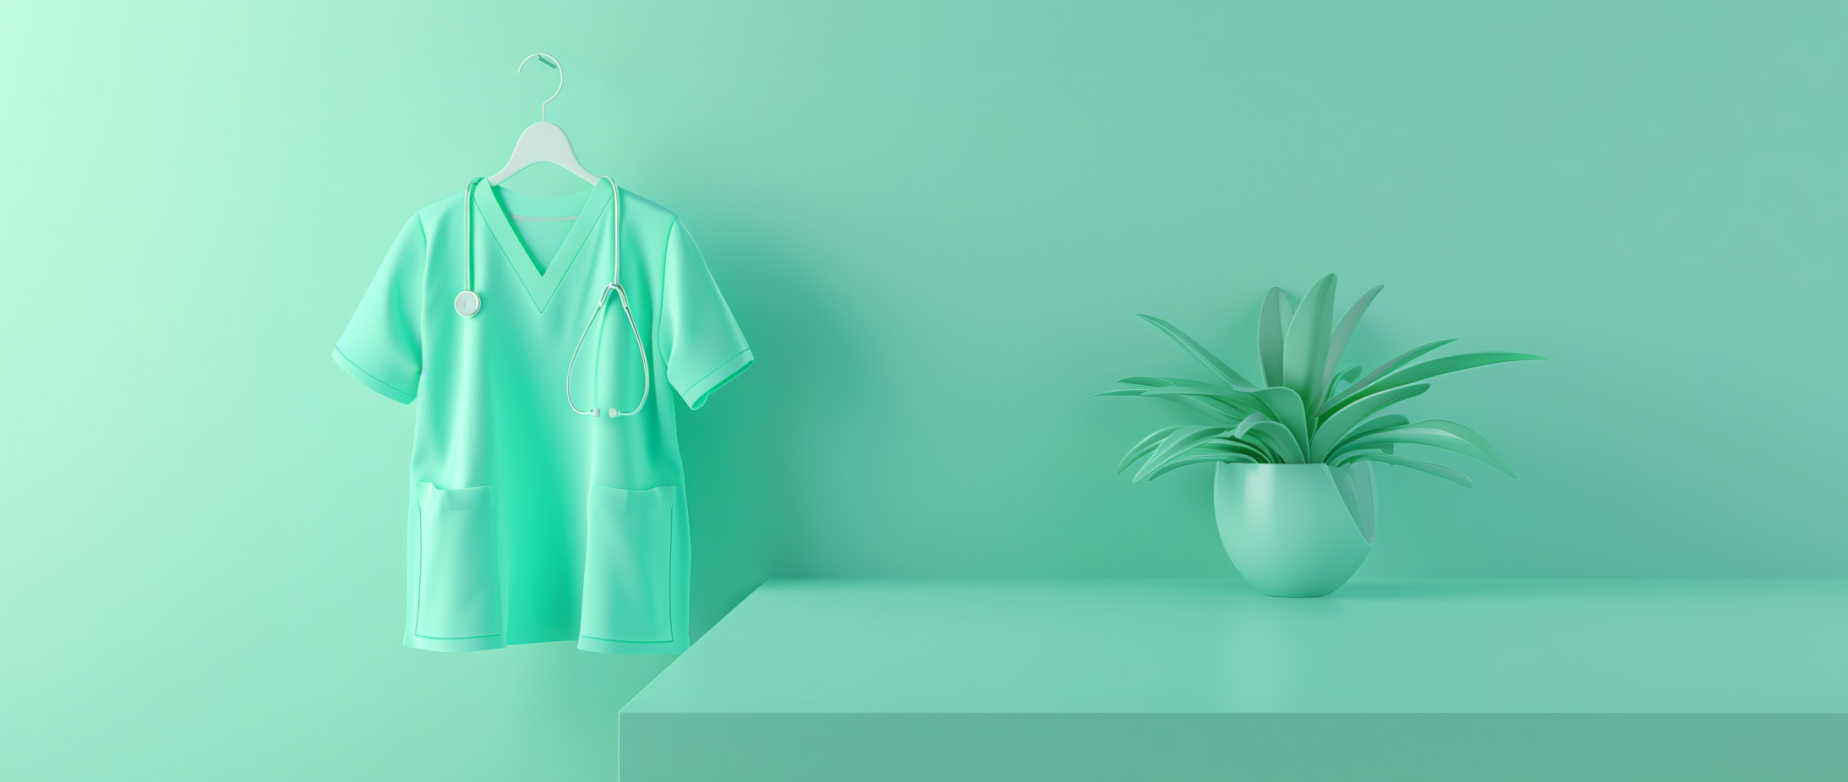 Mint green scrubs and a stethoscope hanging next to a green plant on a table in a mint green room.